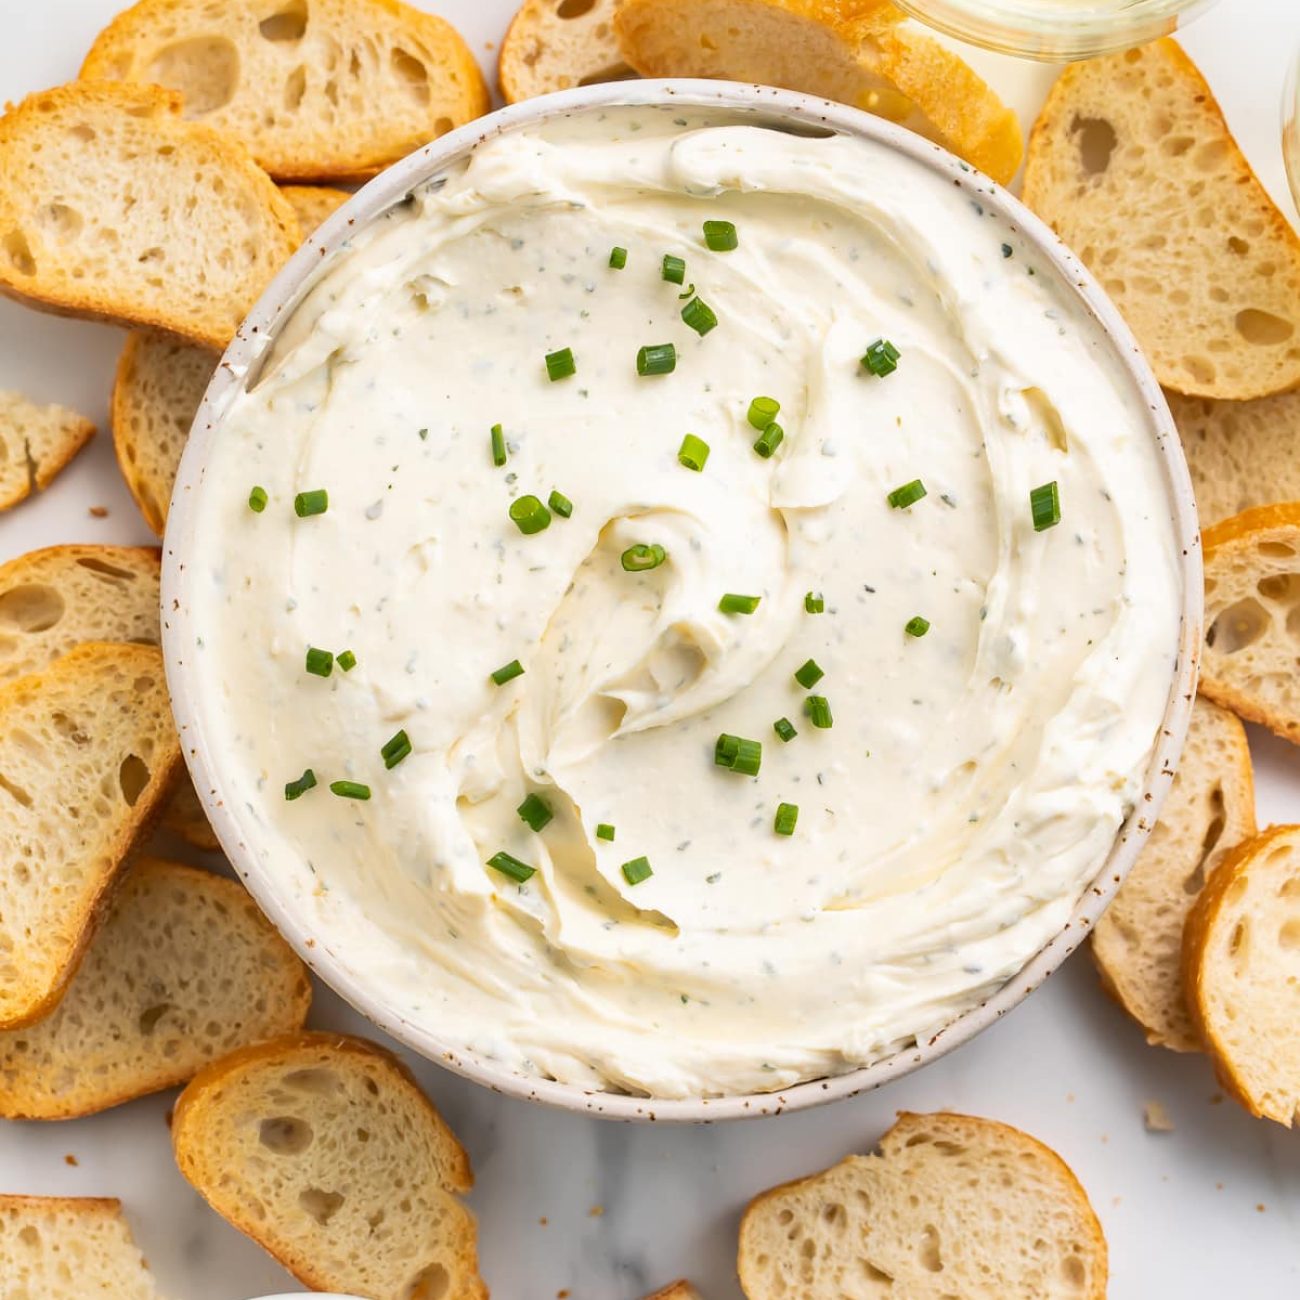 Boursin Cheese – Make Your Own Homemade